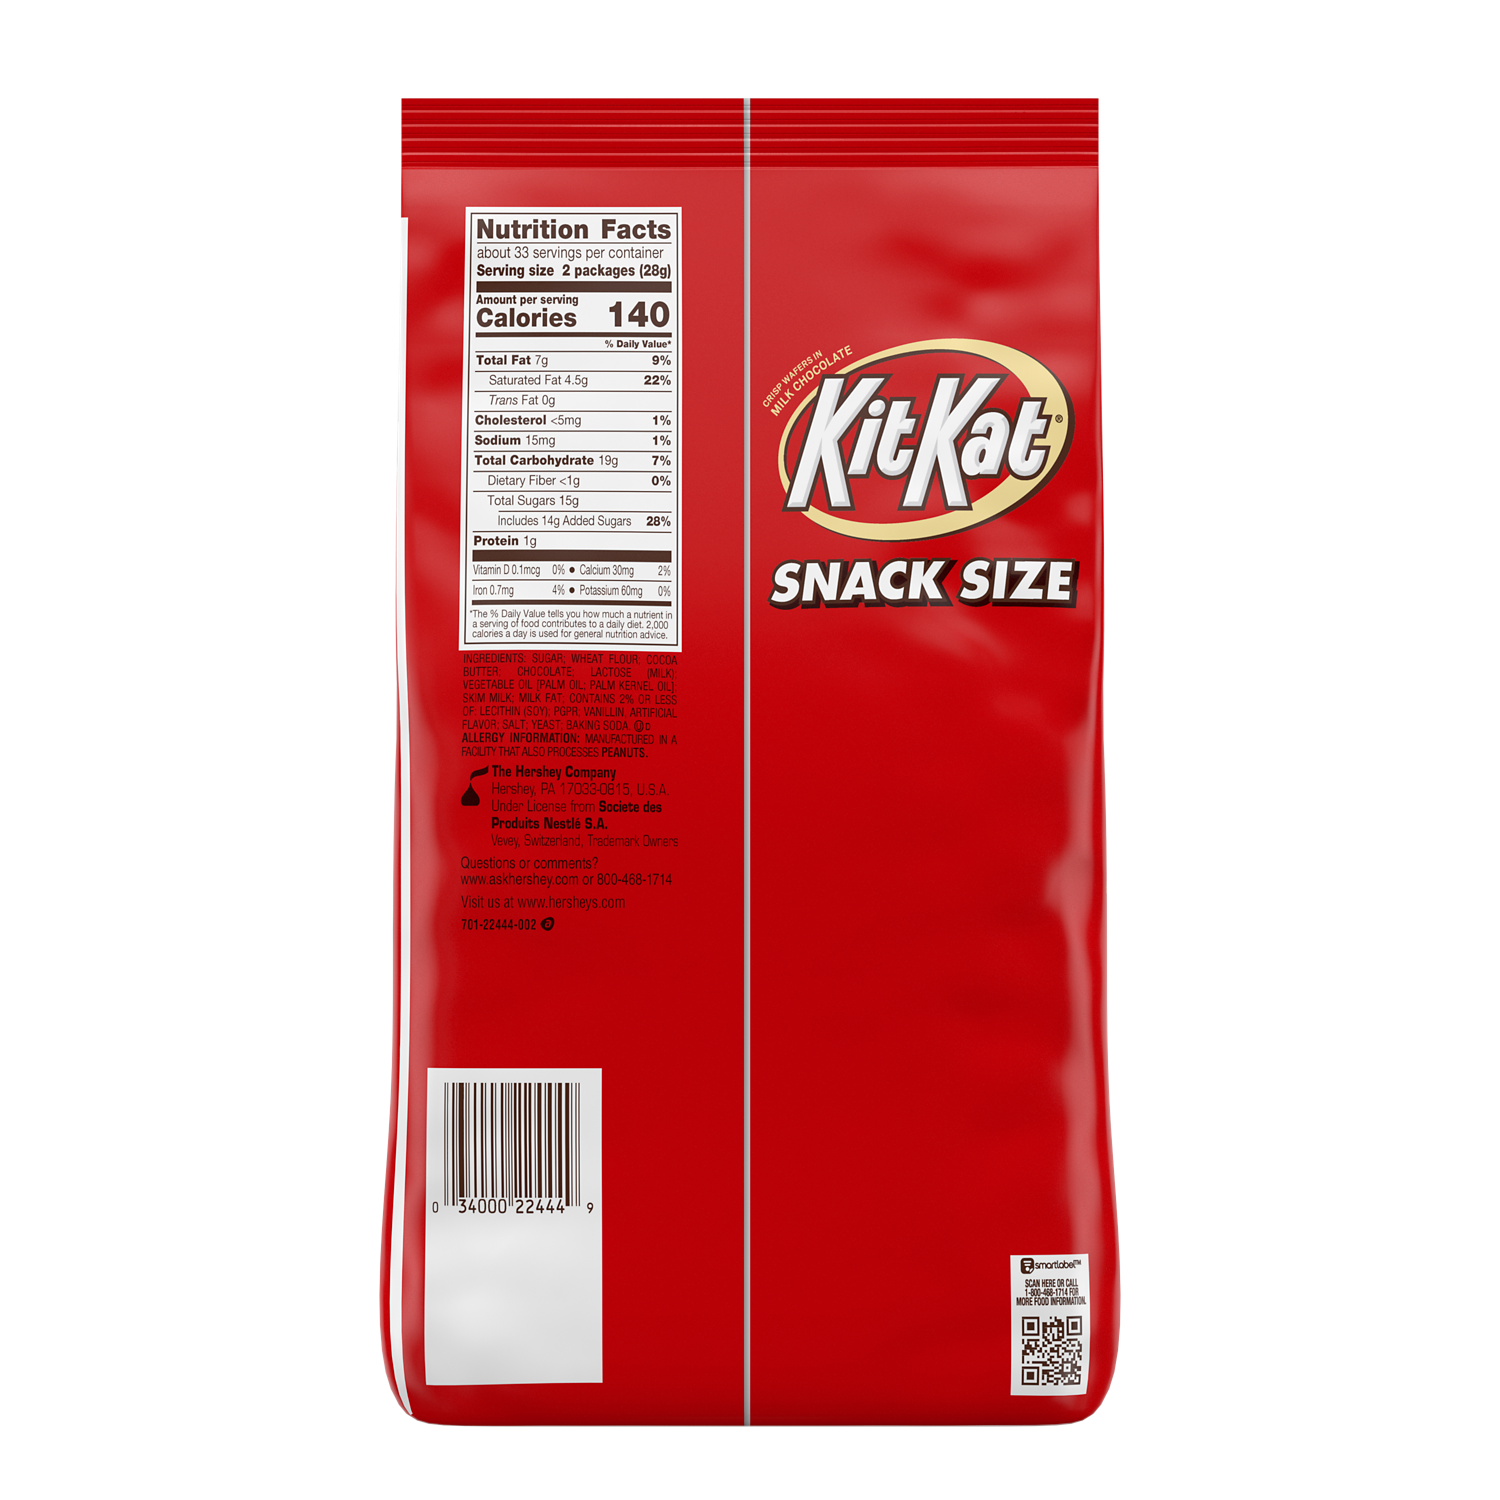 KIT KAT® Milk Chocolate Snack Size Candy Bars, 32.34 oz bag, 66 pieces - Back of Package